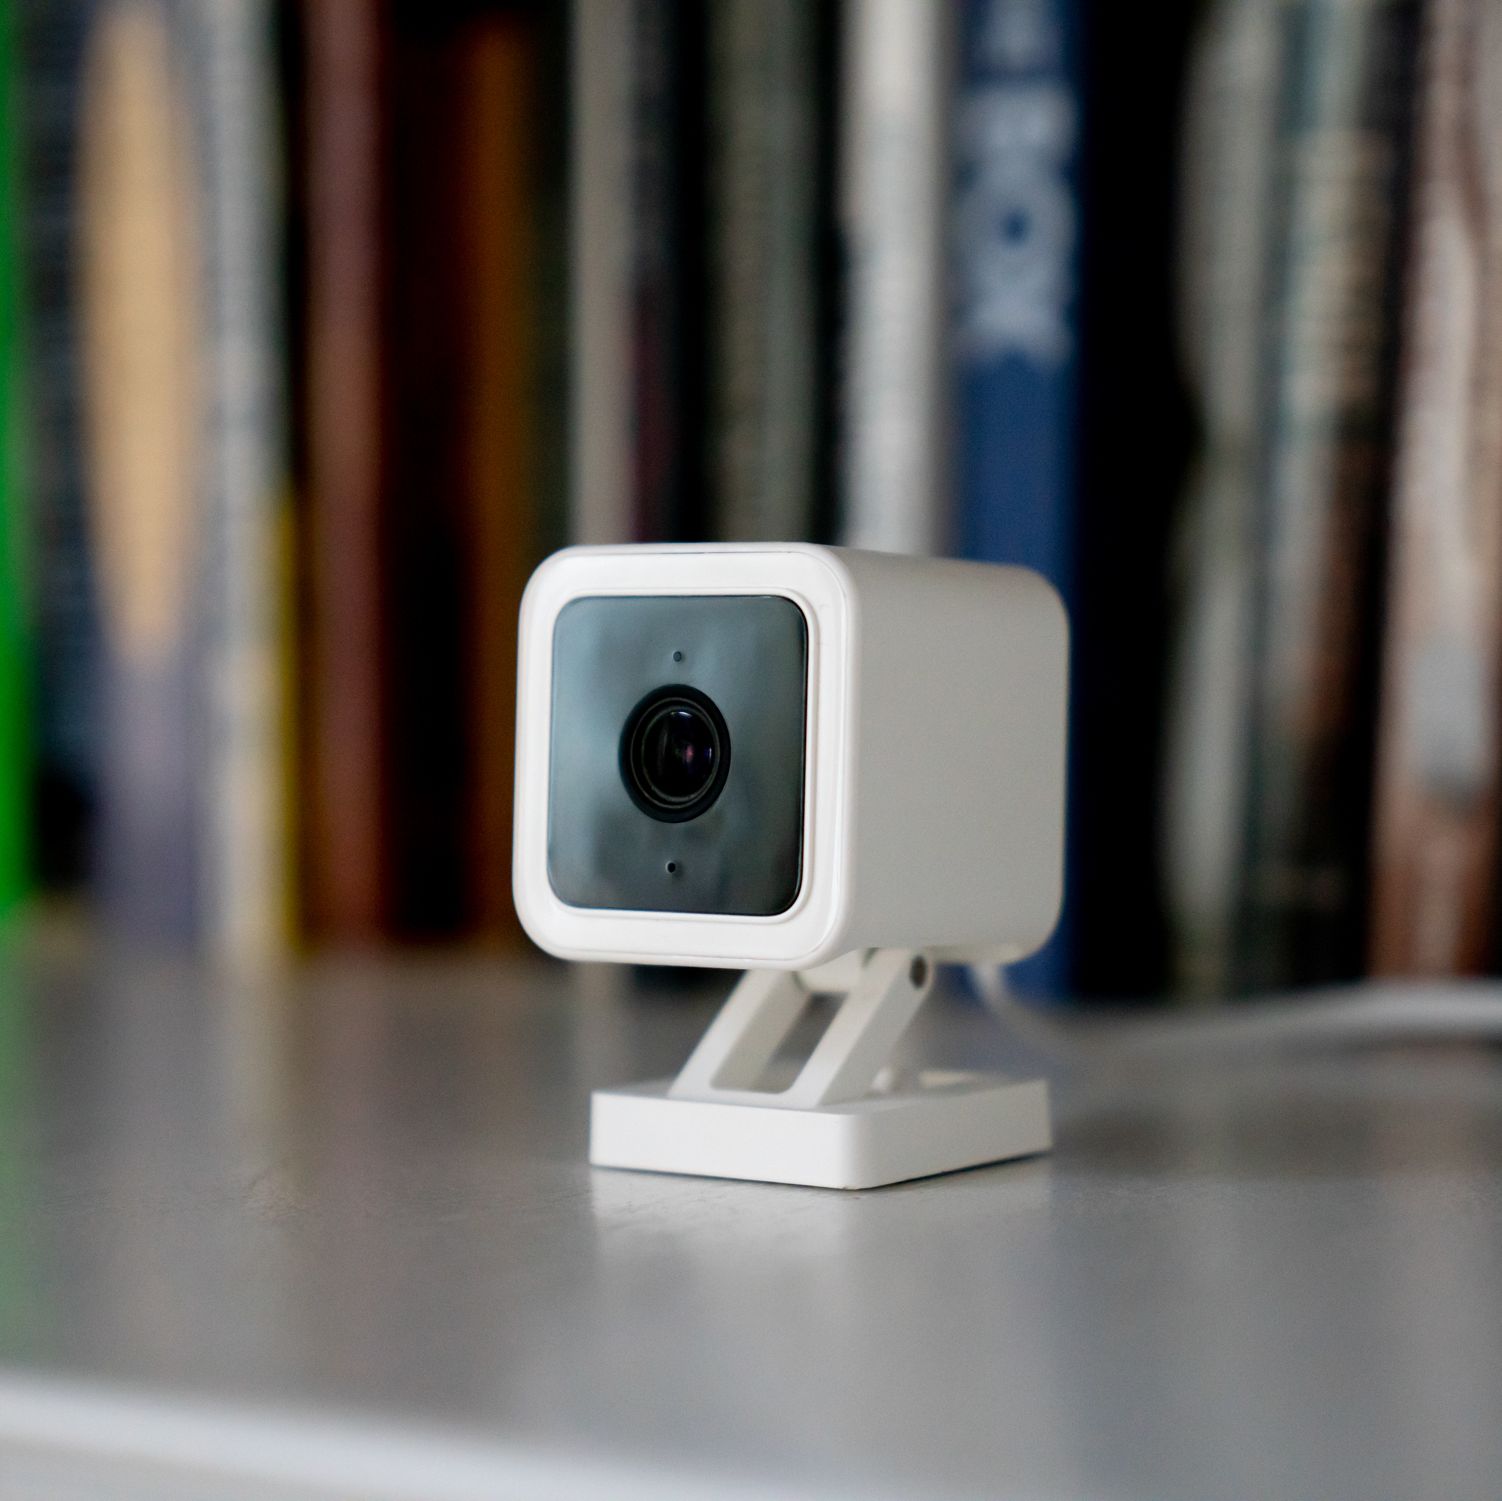 Wyze Managed to Condense A Full Home Security System Into A $35 Camera